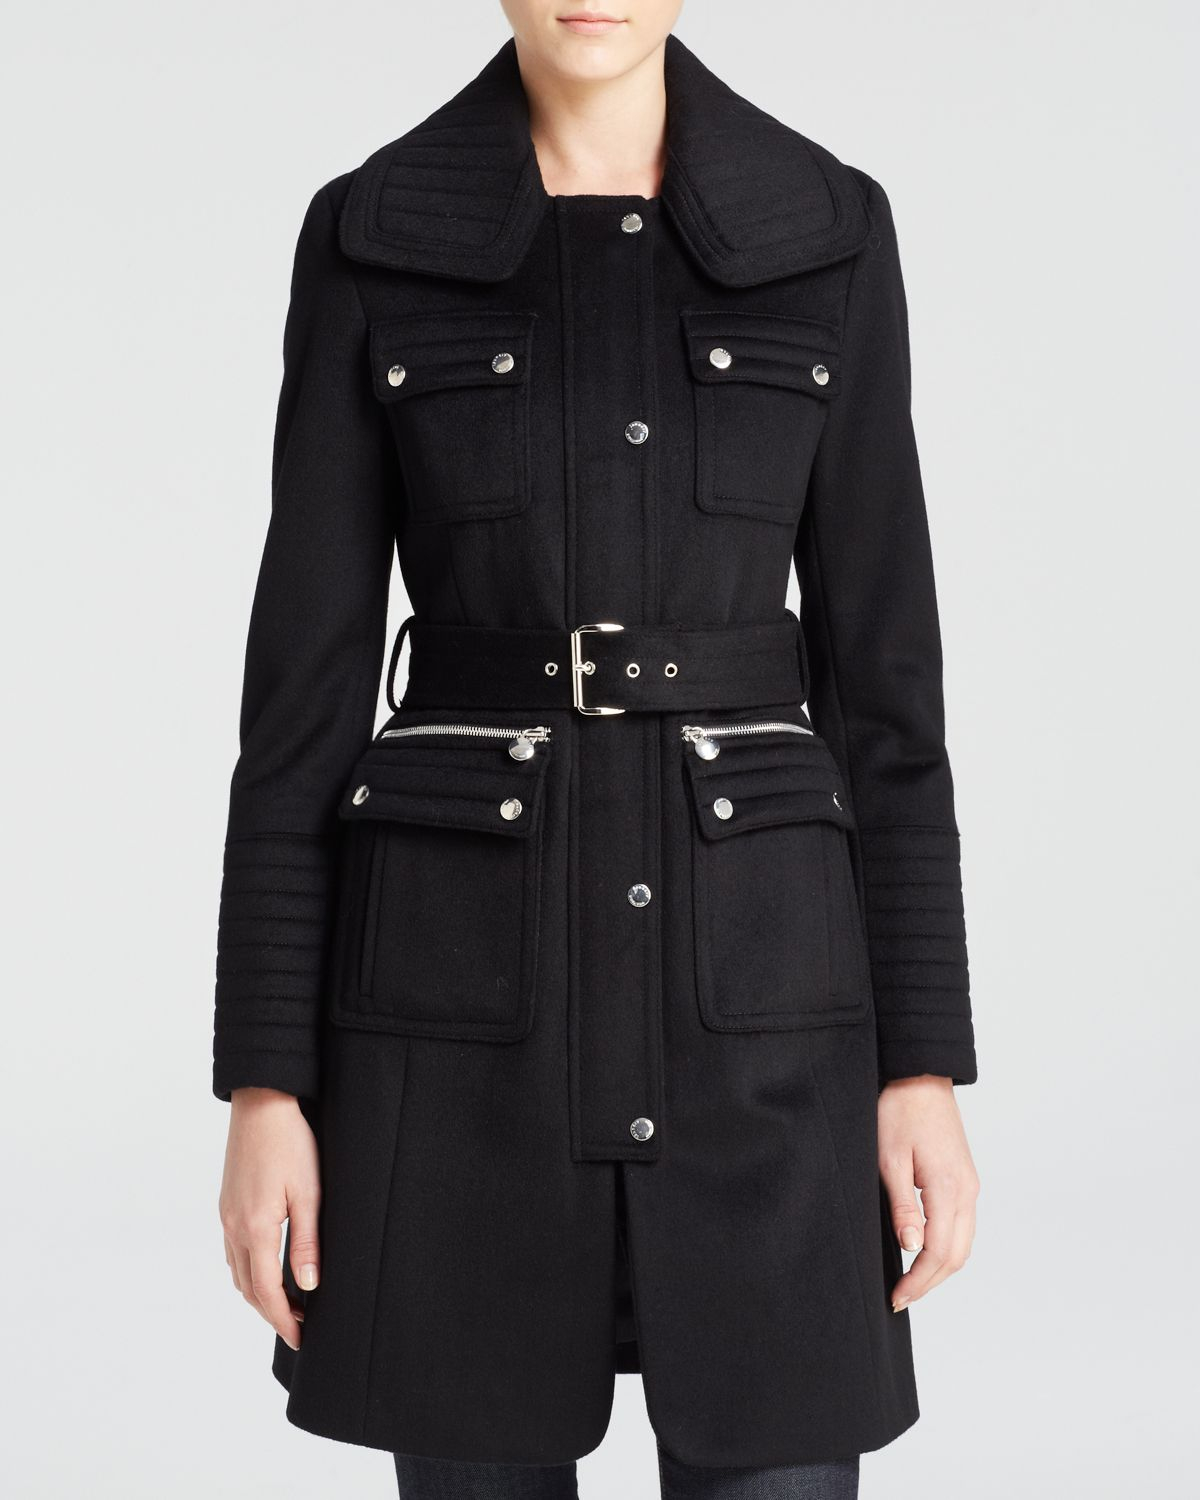 Laundry by shelli segal Belted Military Wool Coat in Black | Lyst